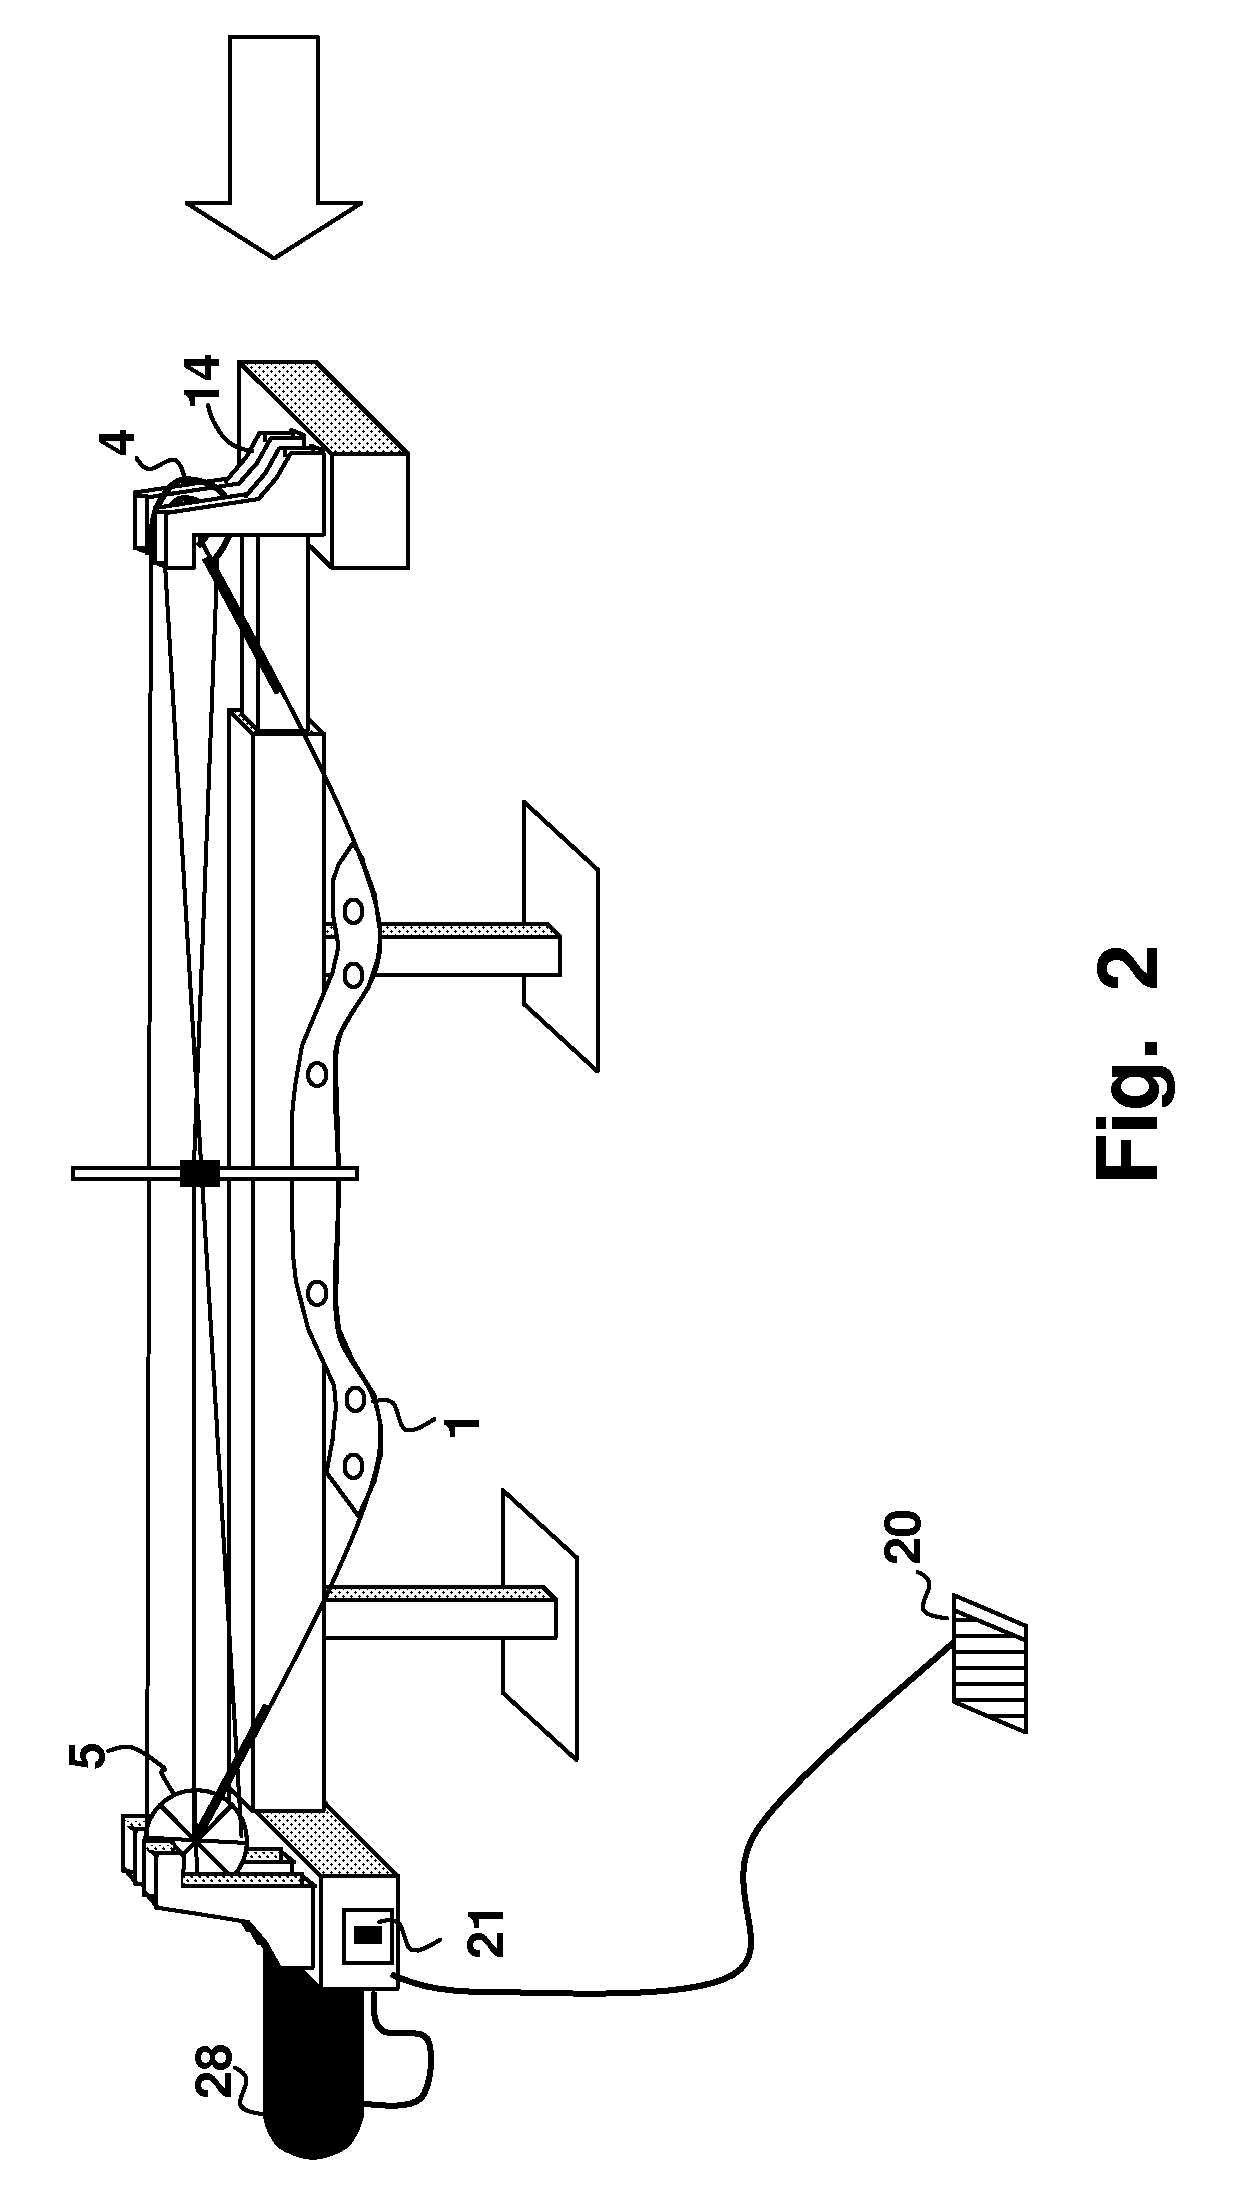 Compound bow maintenance press and method for compressing a compound bow from the bow limb ends